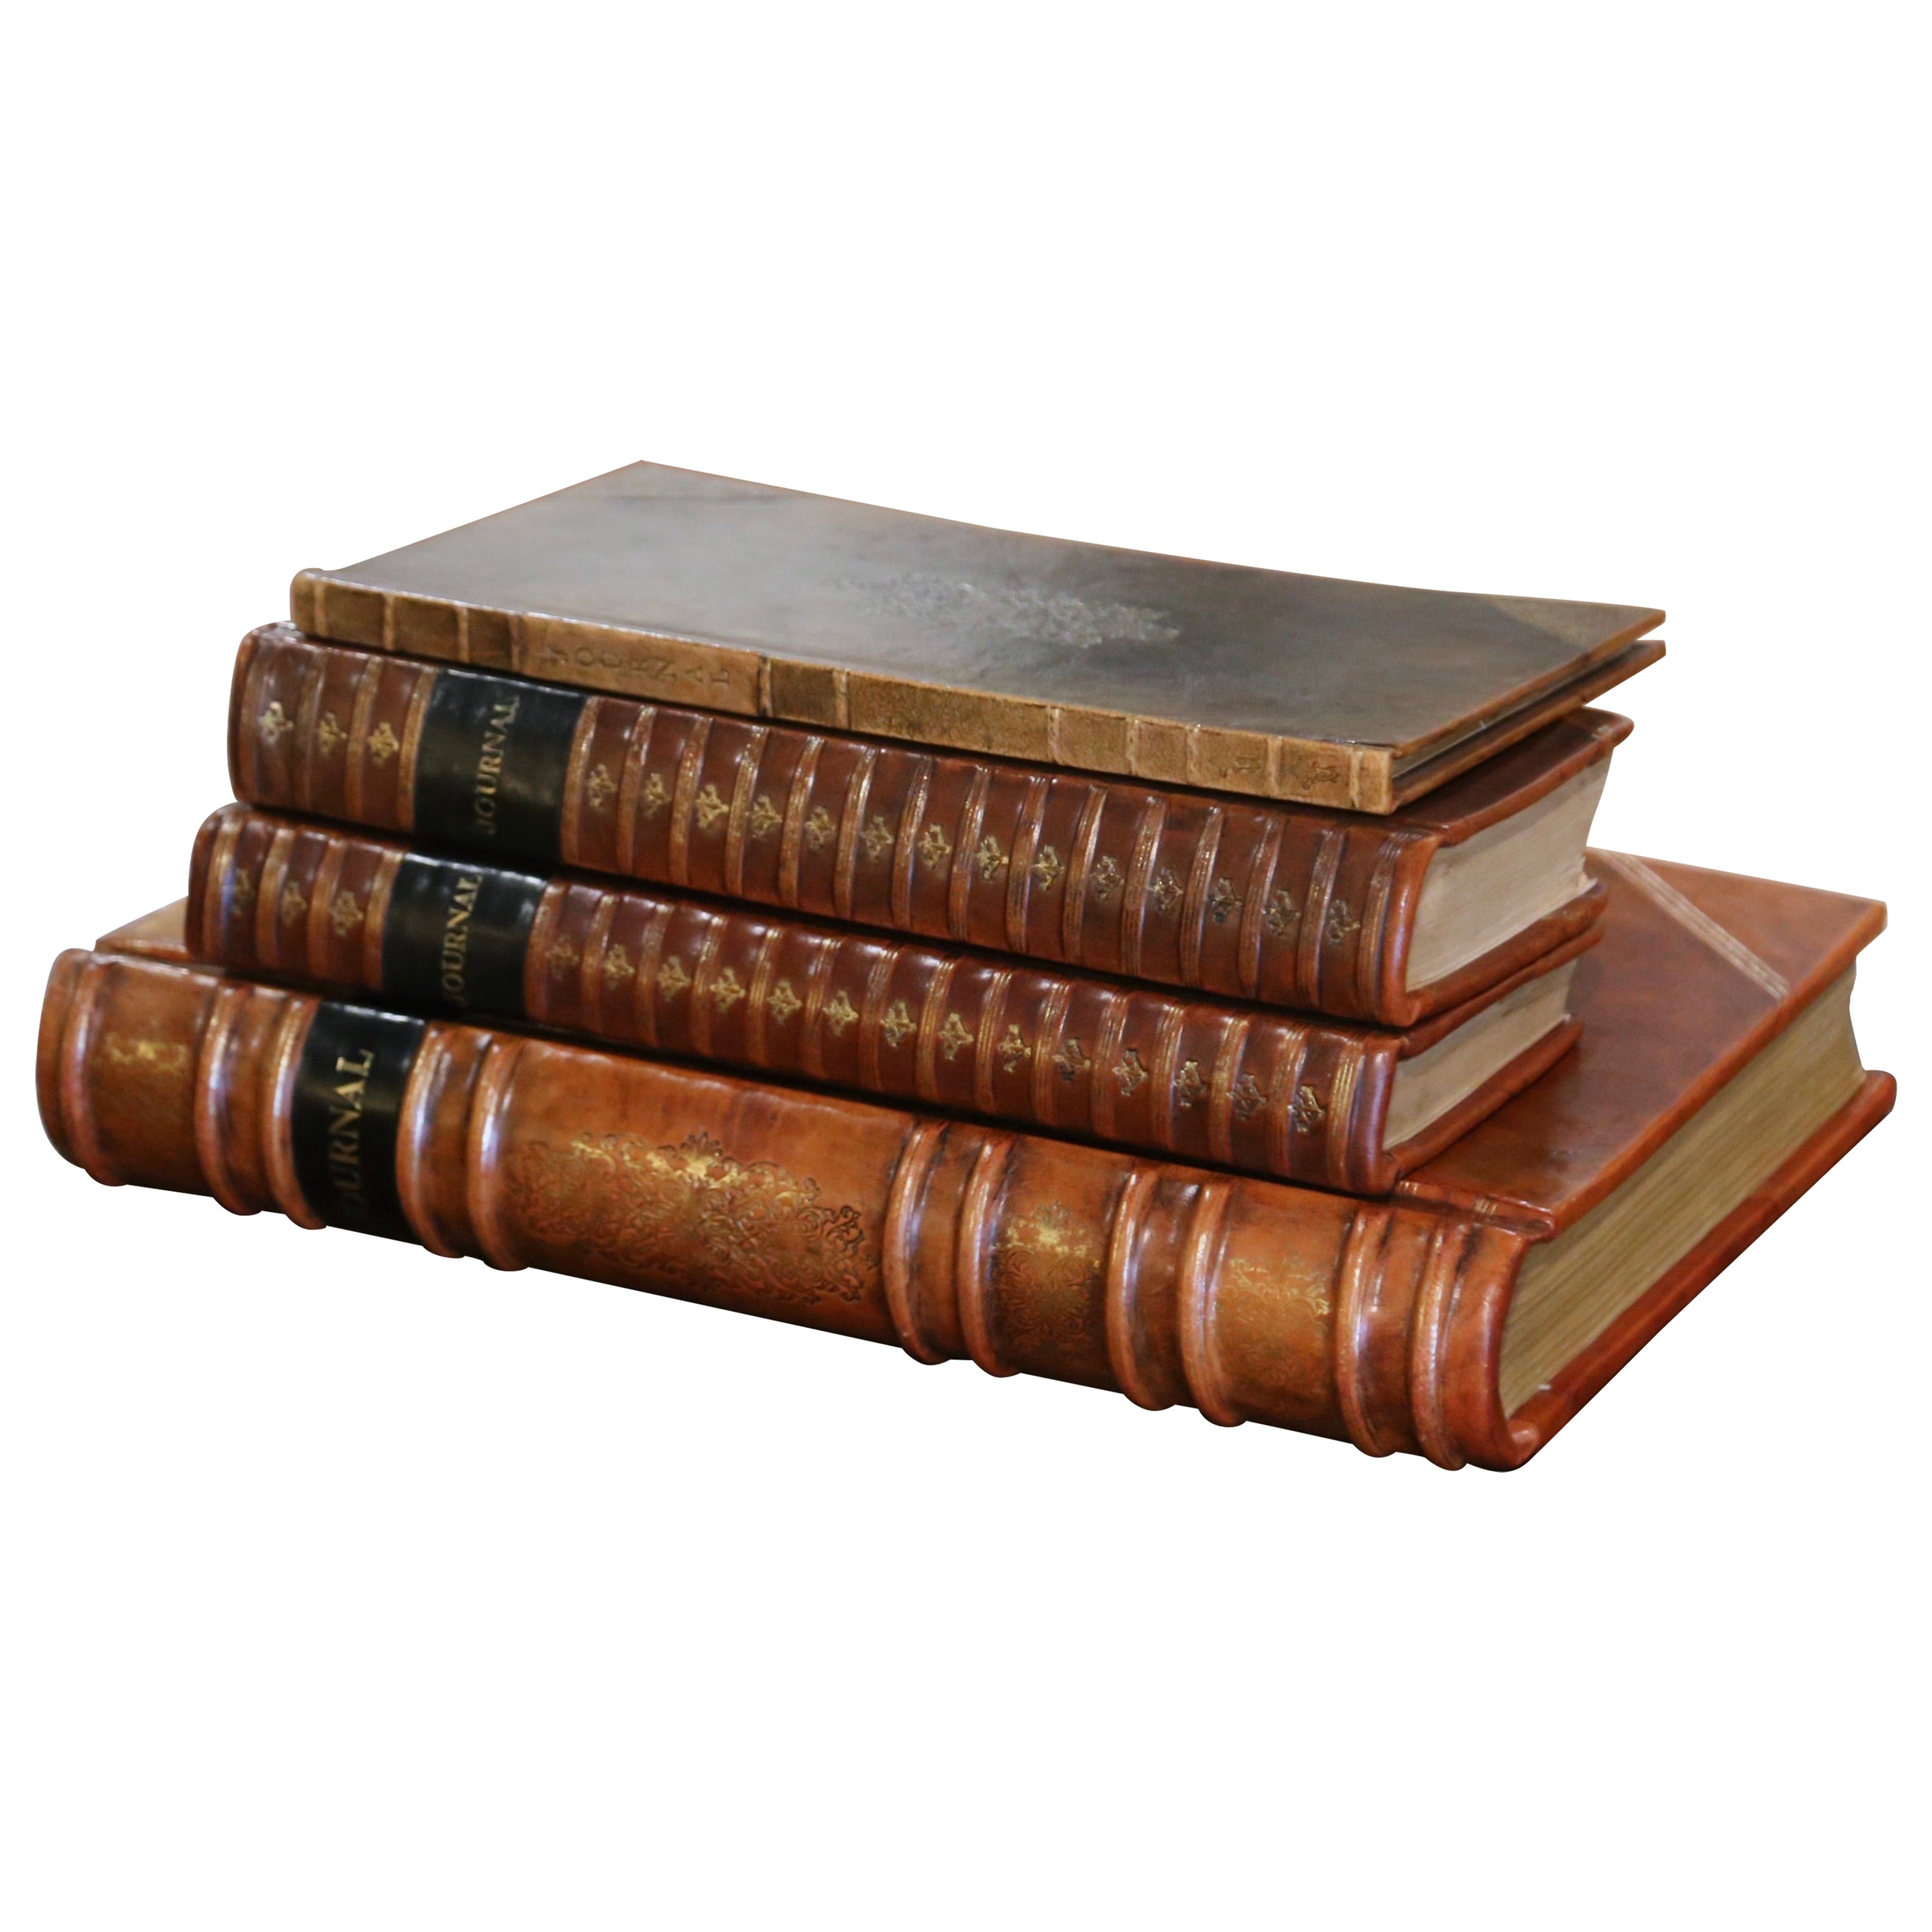  Antique Leather Bound and Gilt Accounting Books Dated 1909/1928, Set of Four